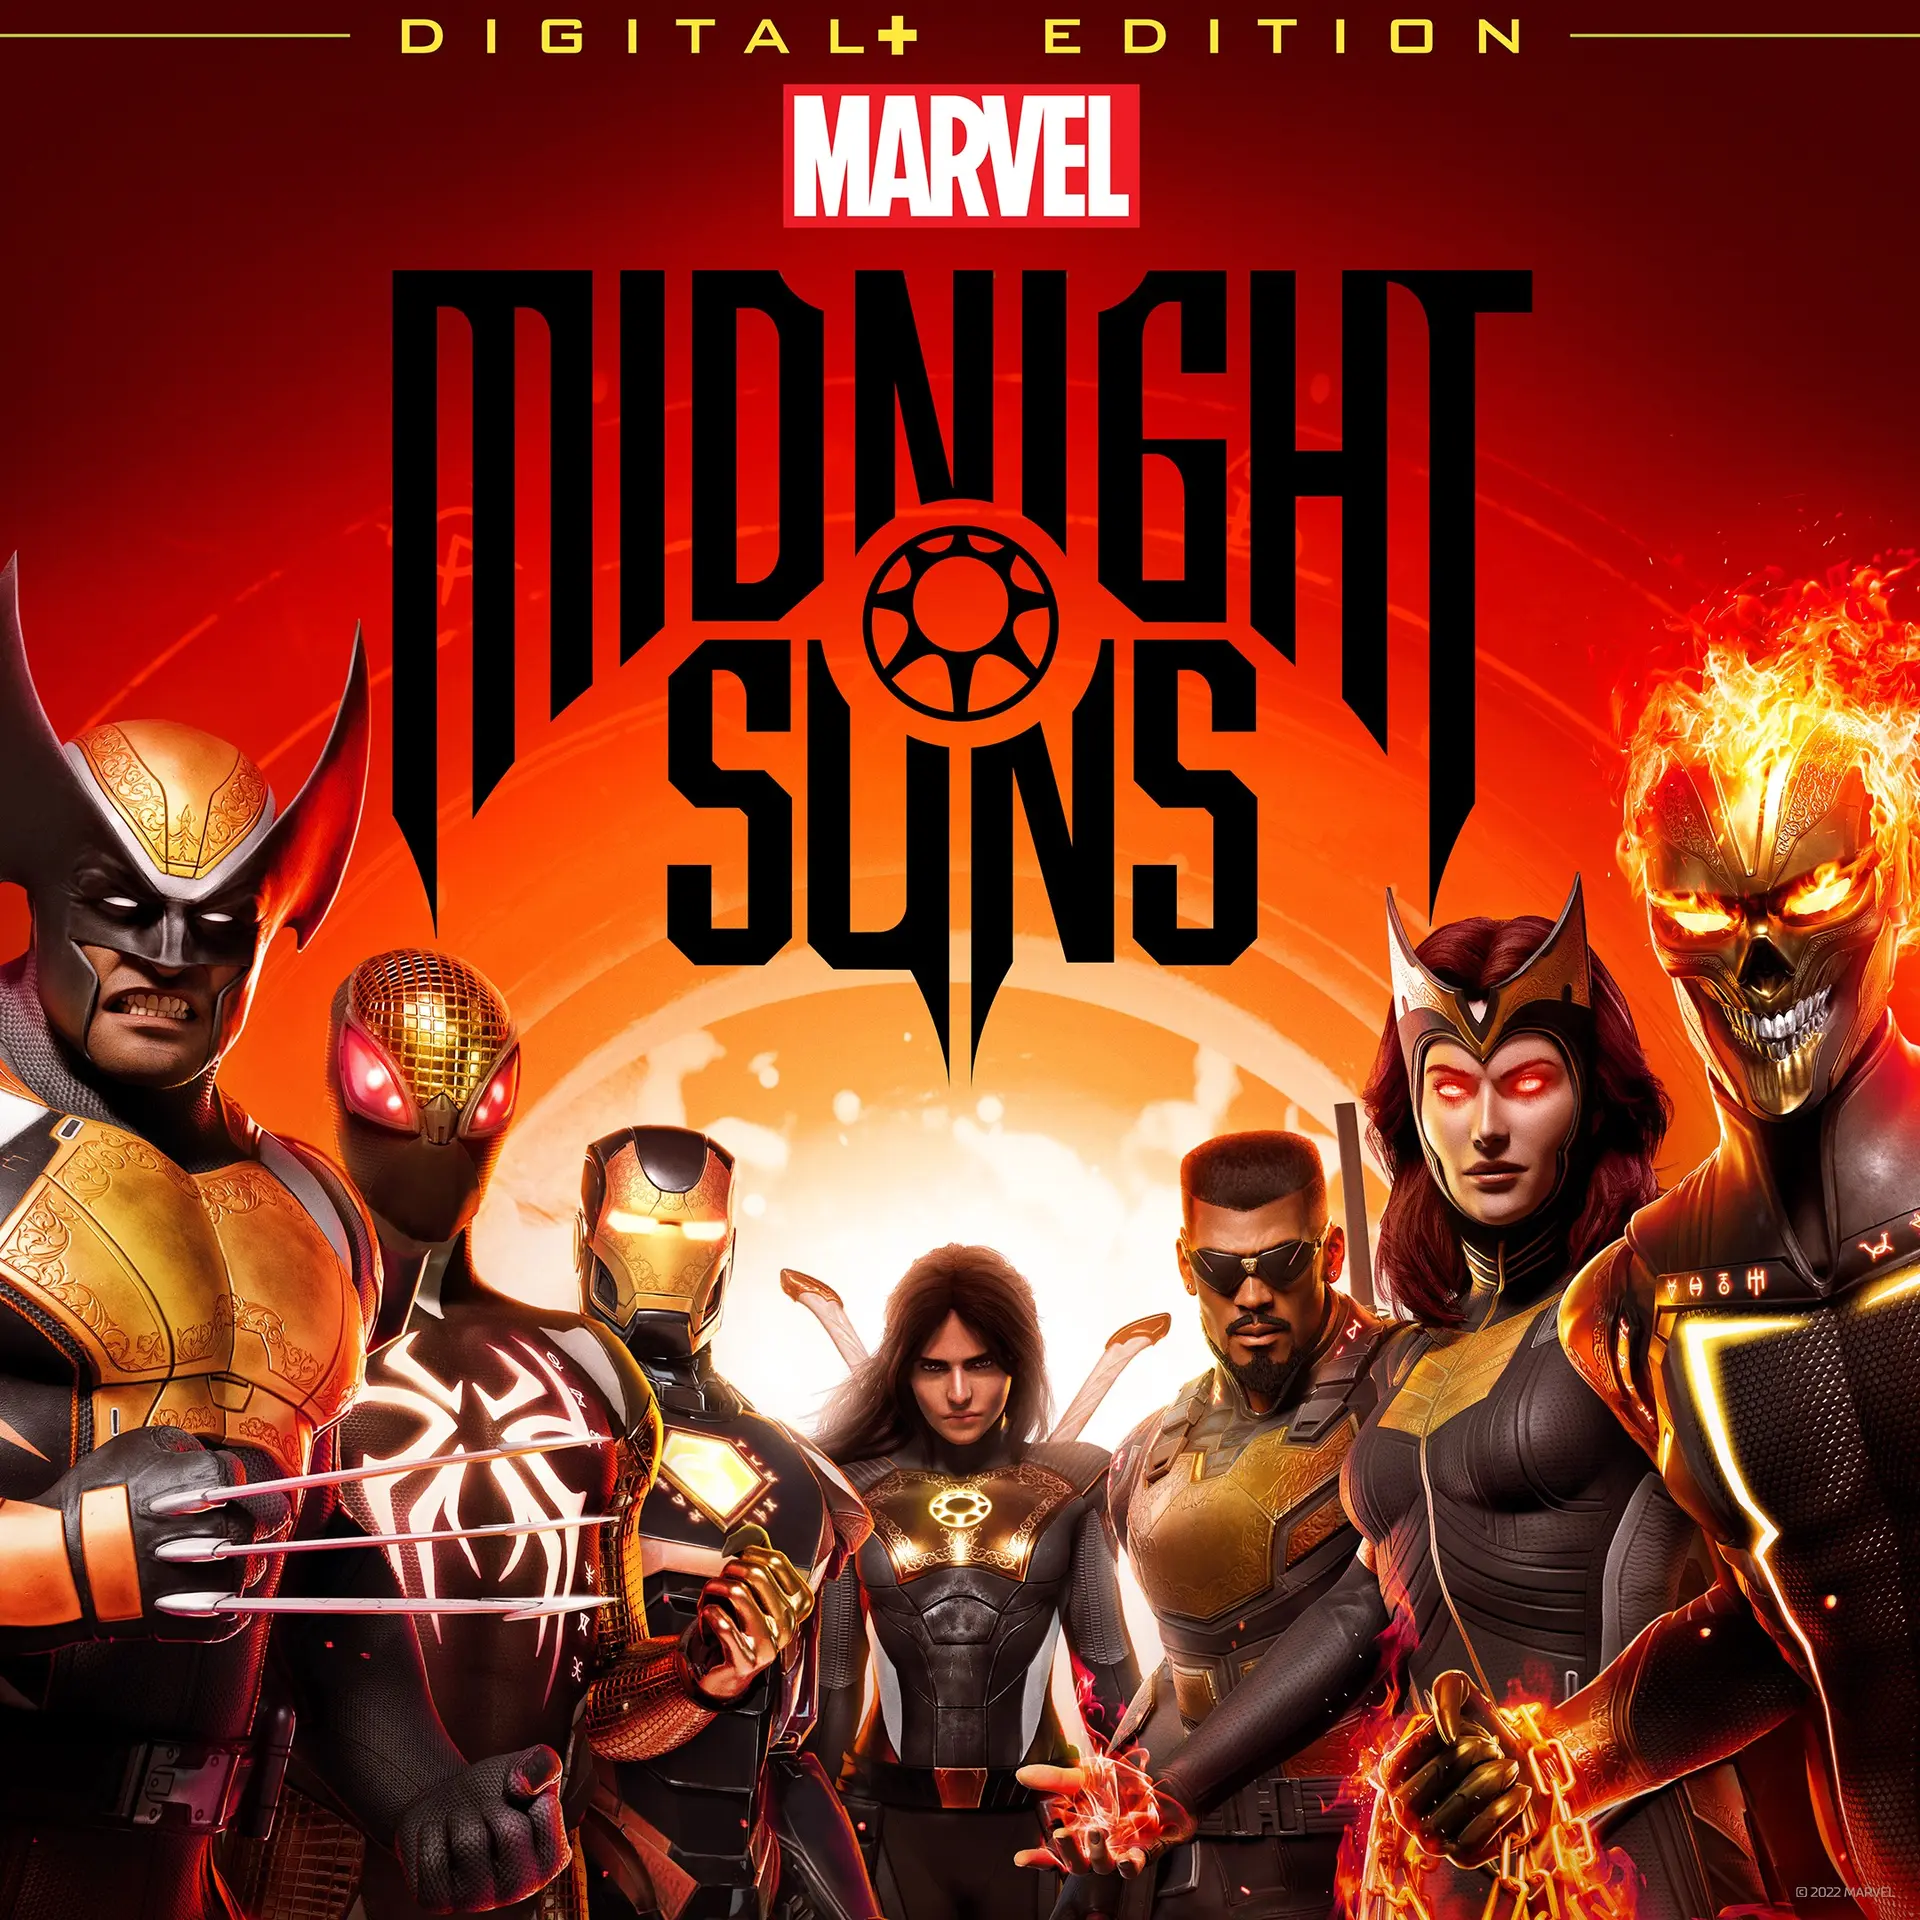 Marvel's Midnight Suns Digital+ Edition for Xbox Series X|S (Xbox Games UK)